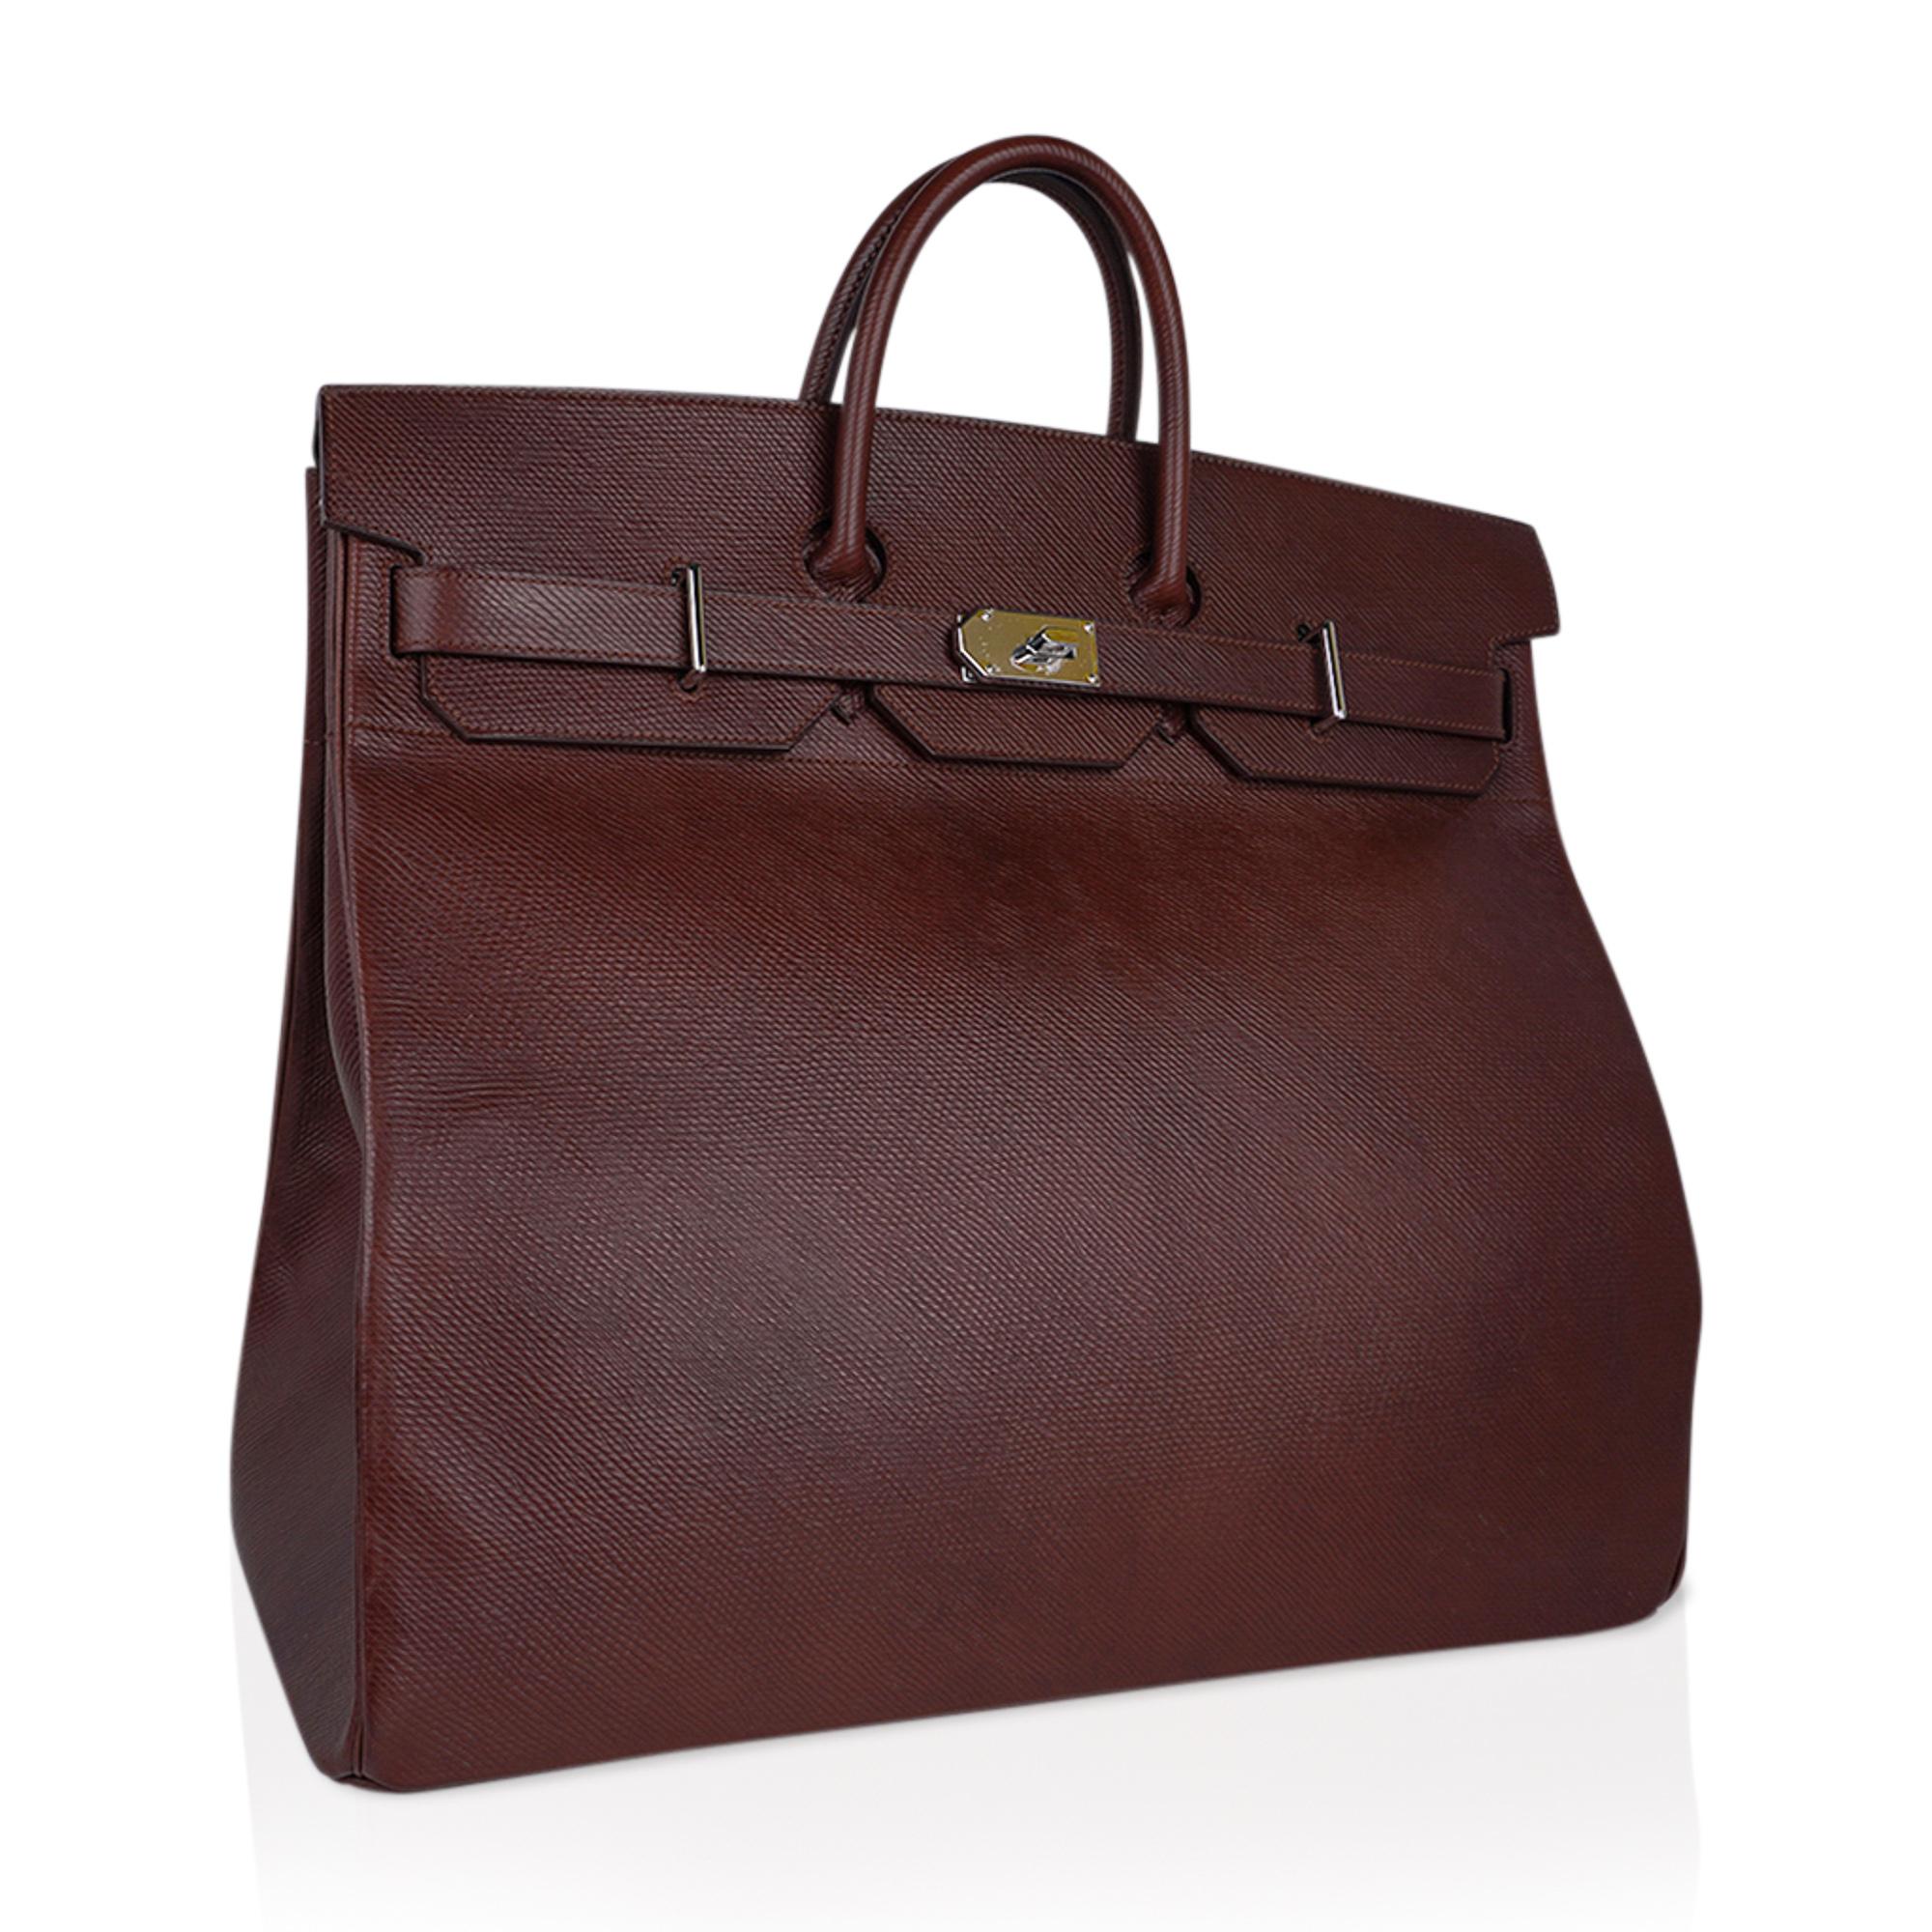 Mightychic offers a rare very limited edition Volynka Russian leather Hermes 50 HAC bag (Haut a Courroies).
It took Hermes six years to exhume its secrets to recreate this luxurious leather with the remarkable exotic aroma.
Your imagination takes